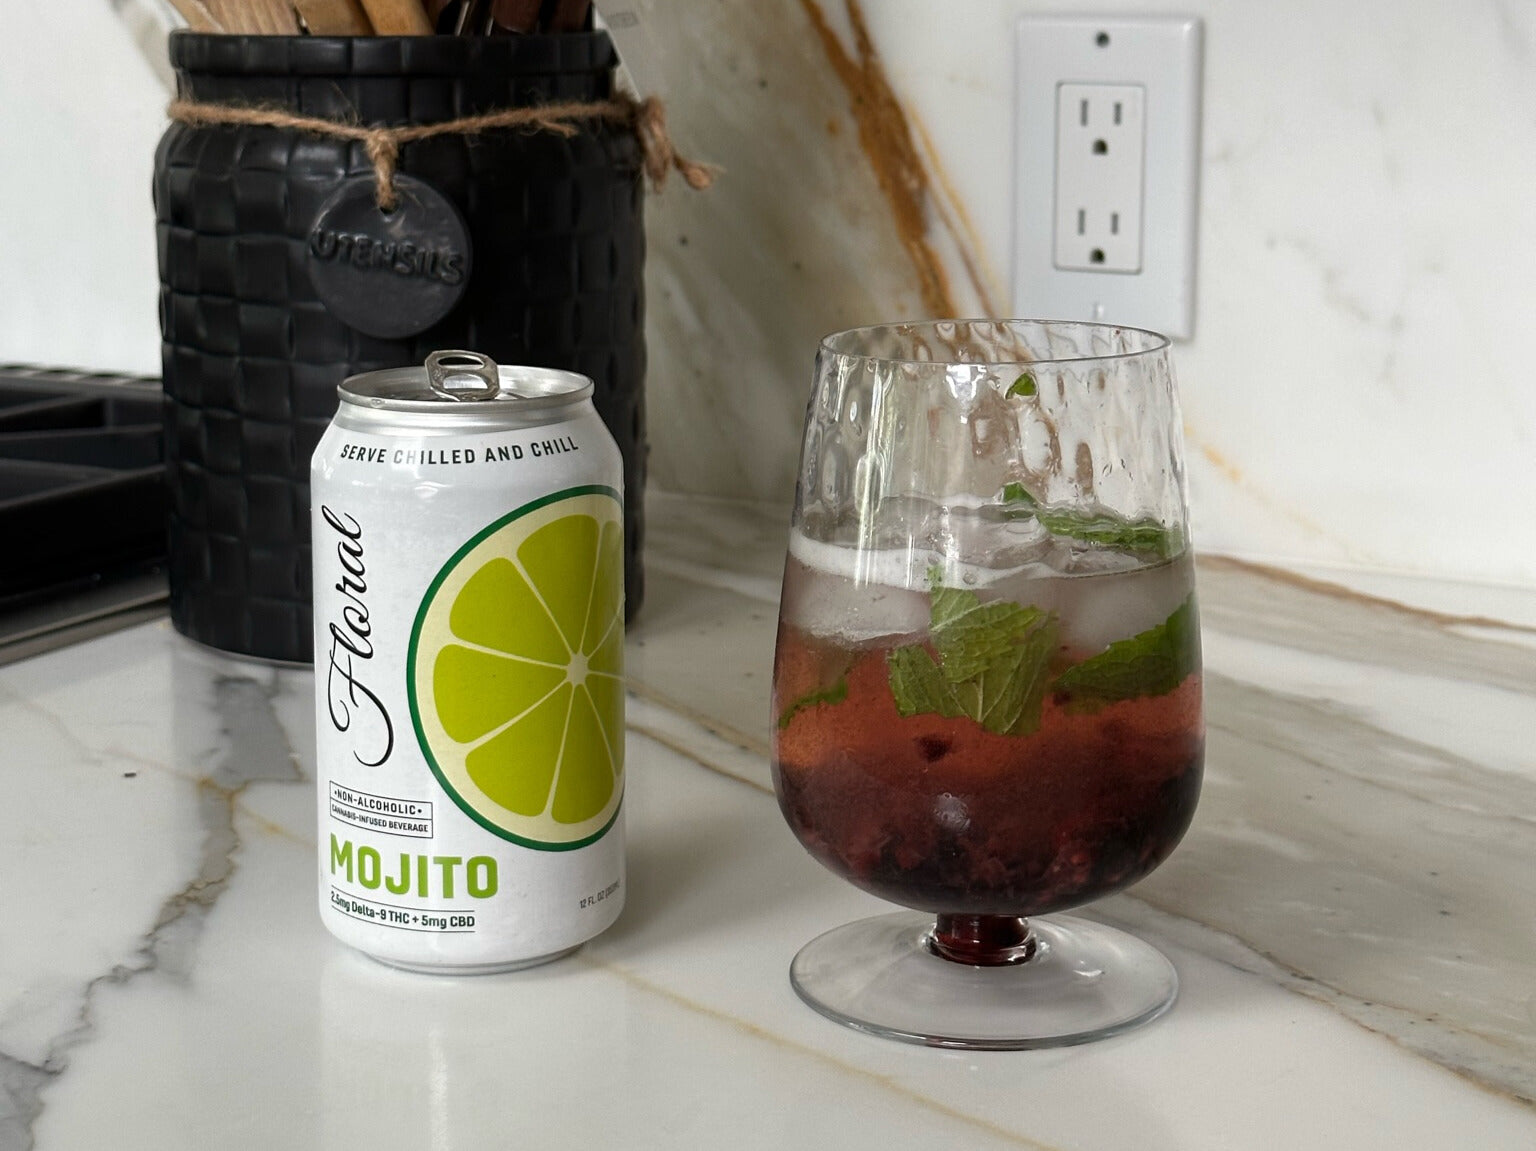 A can of Floral Beverages' Mojito flavor sitting beside a glass filled with the drink.